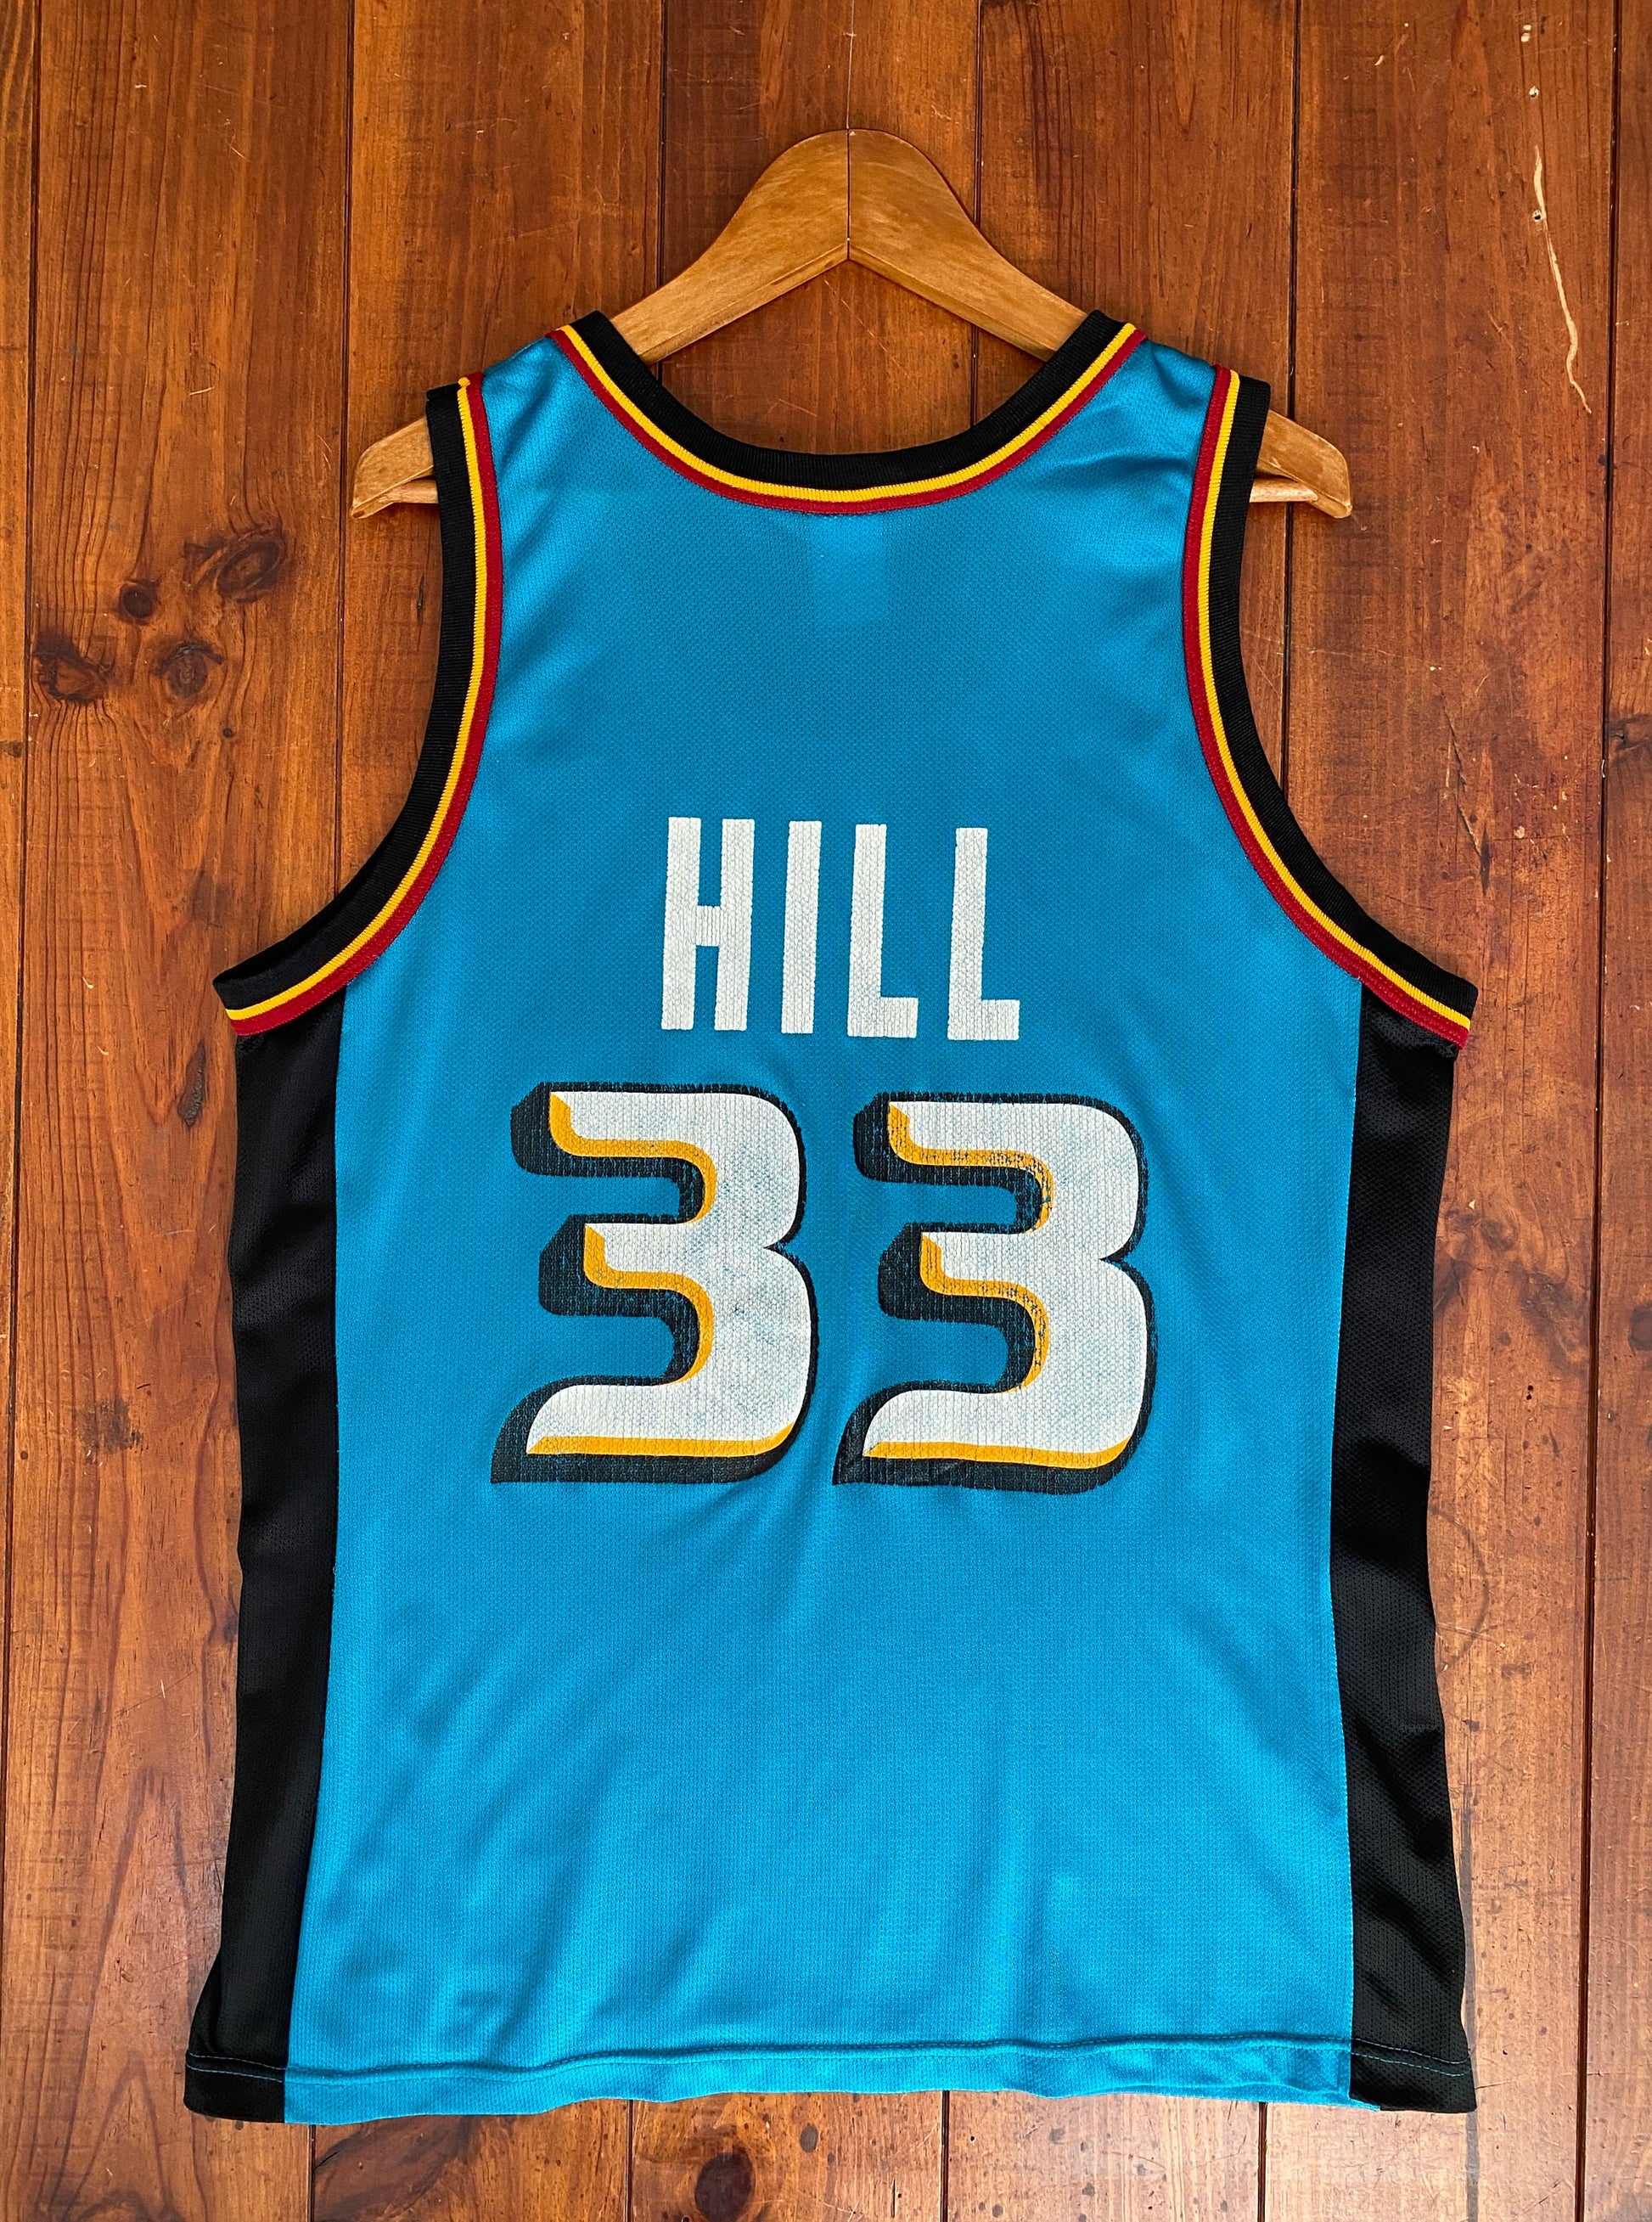 Vintage 90s NBA Champion Detroit Pistons Hill #33 jersey, size 44 - back view. Made in USA by Champion.